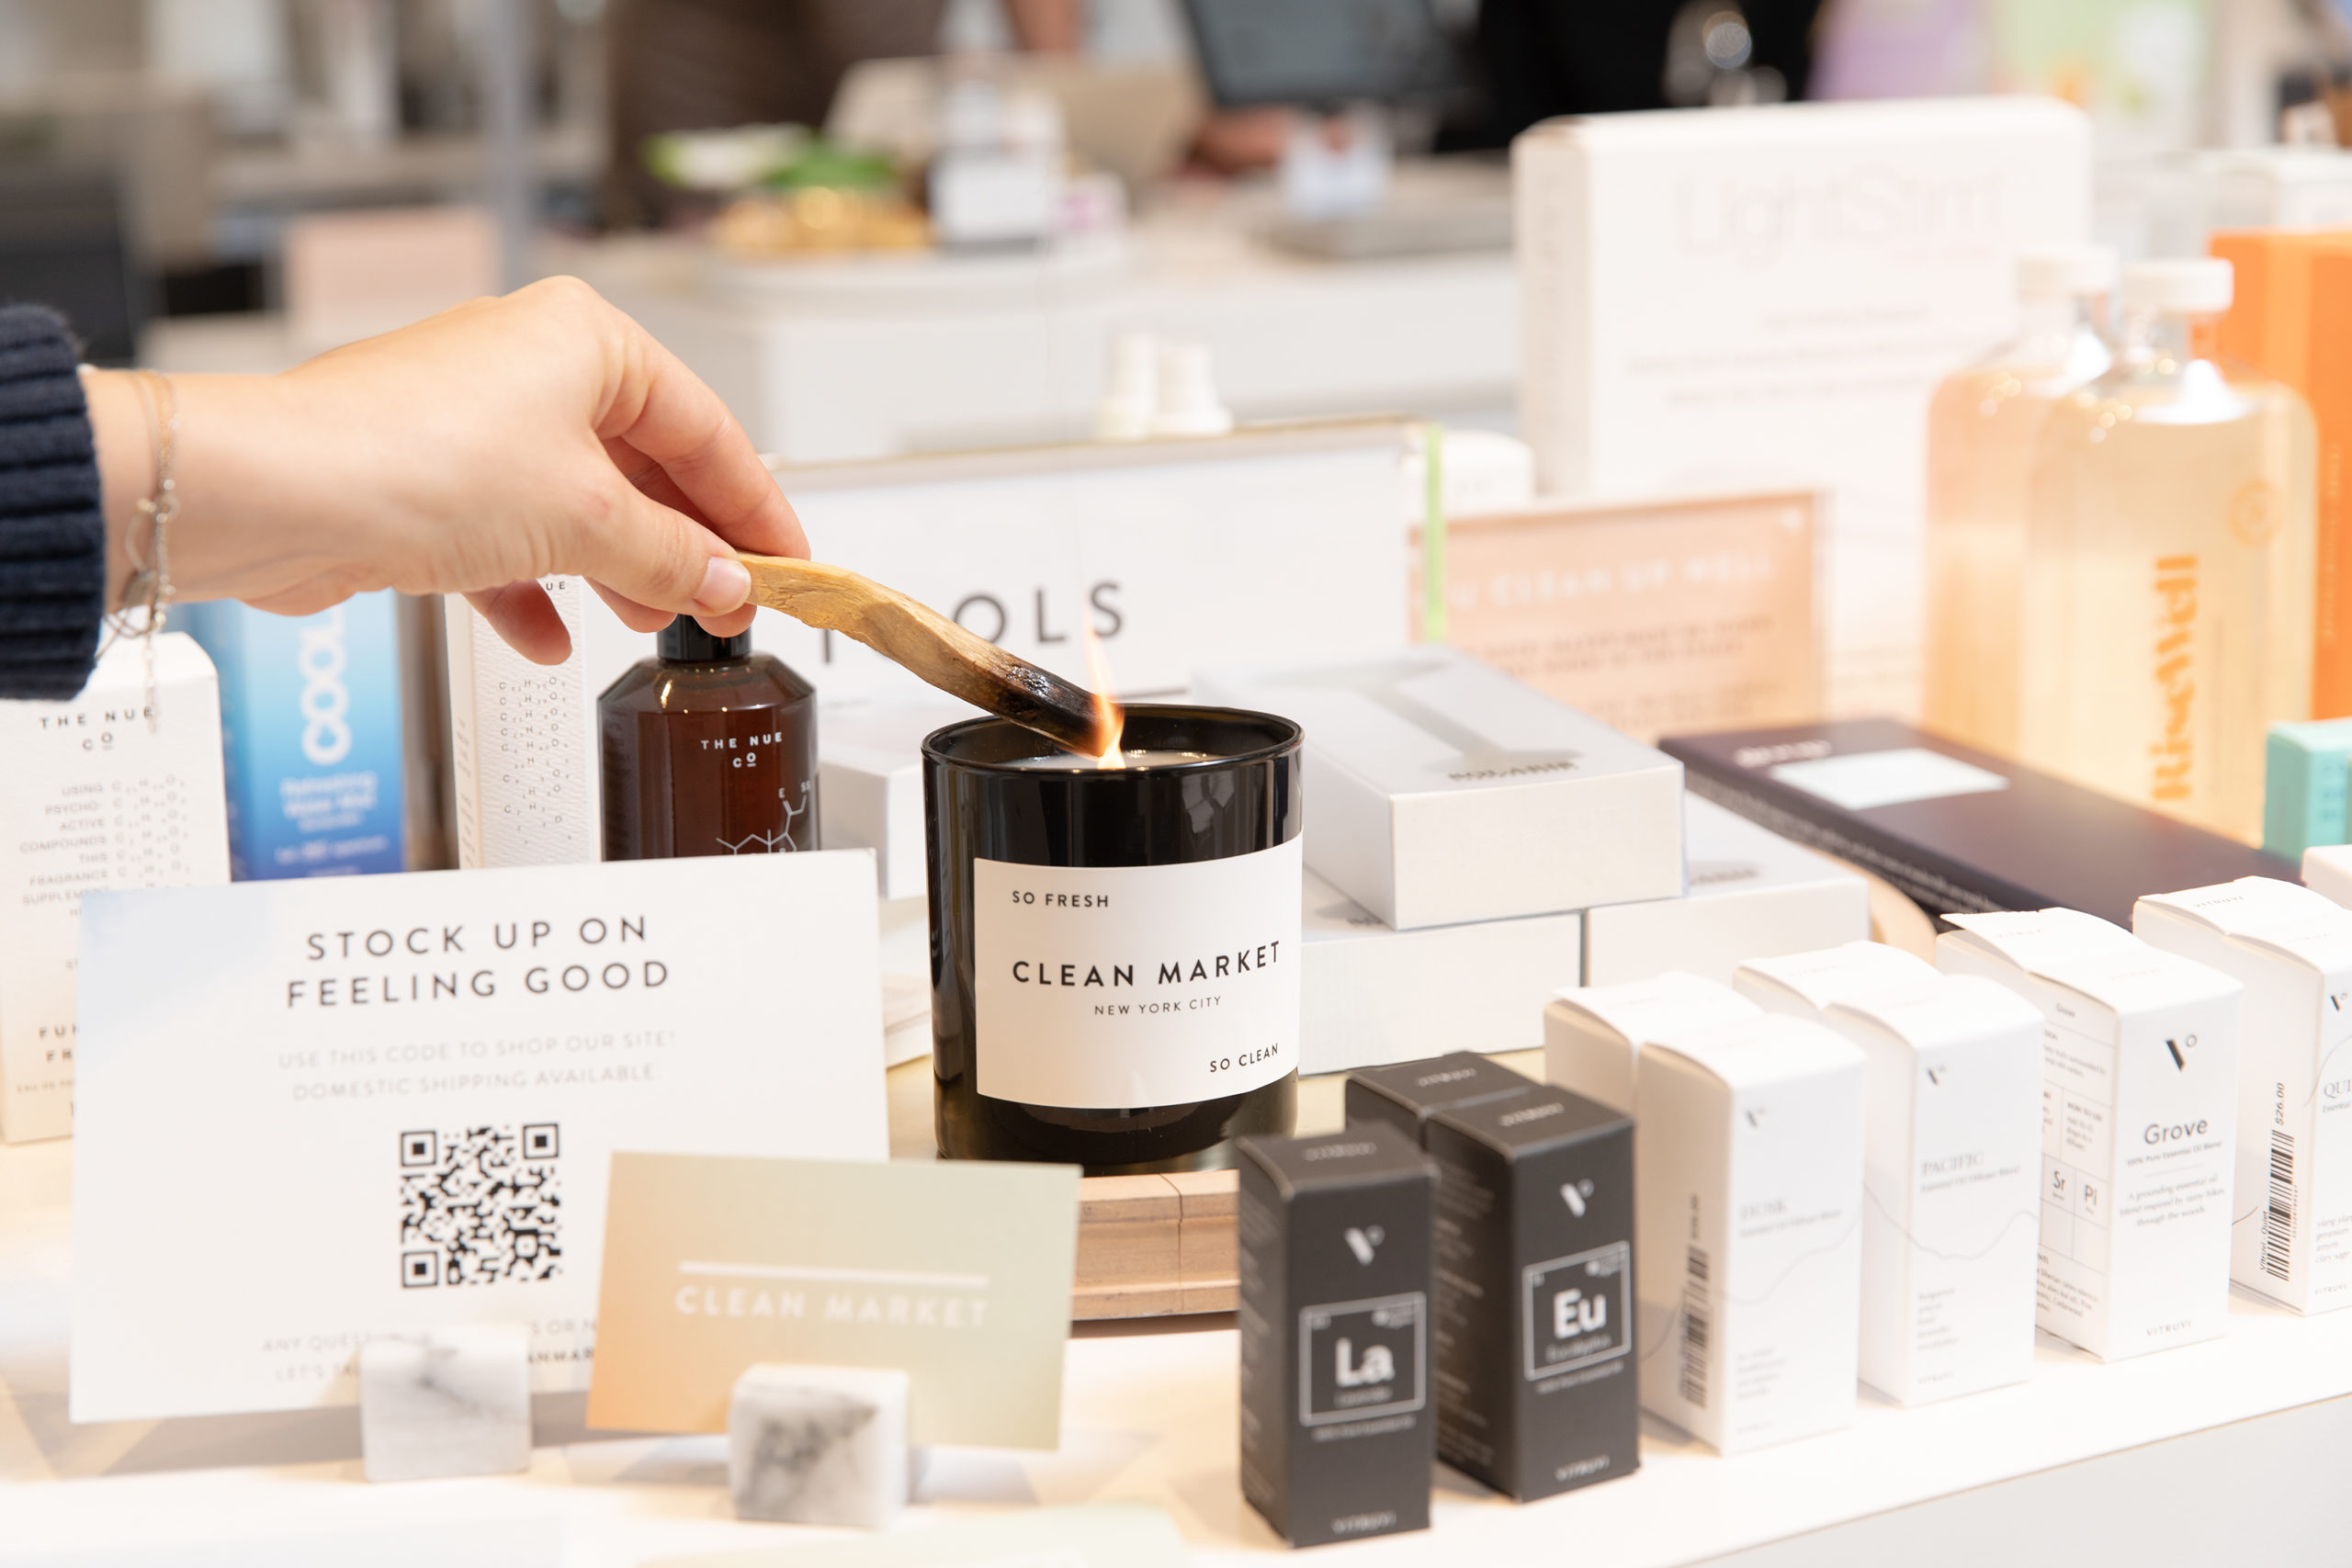 Clean Market candle among beauty products